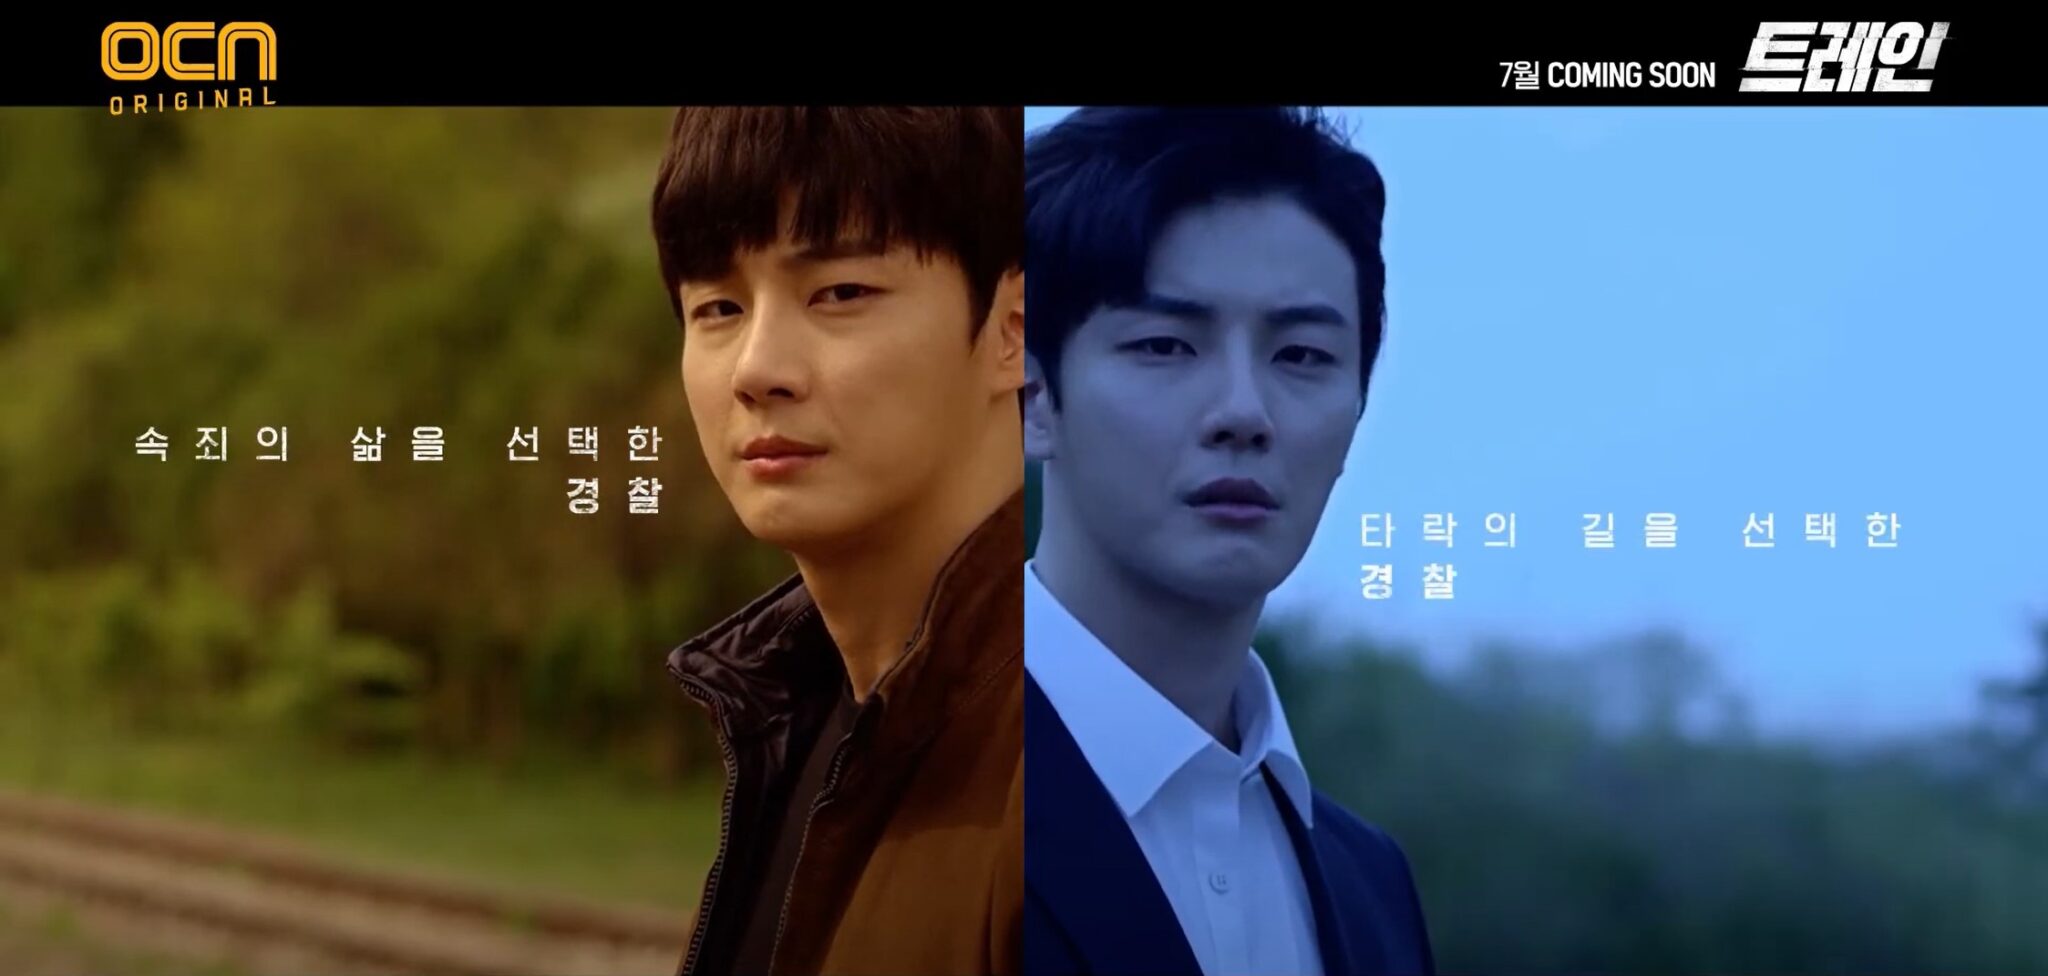 Double the Yoon Shi-yoon in latest teaser for OCN’s Train